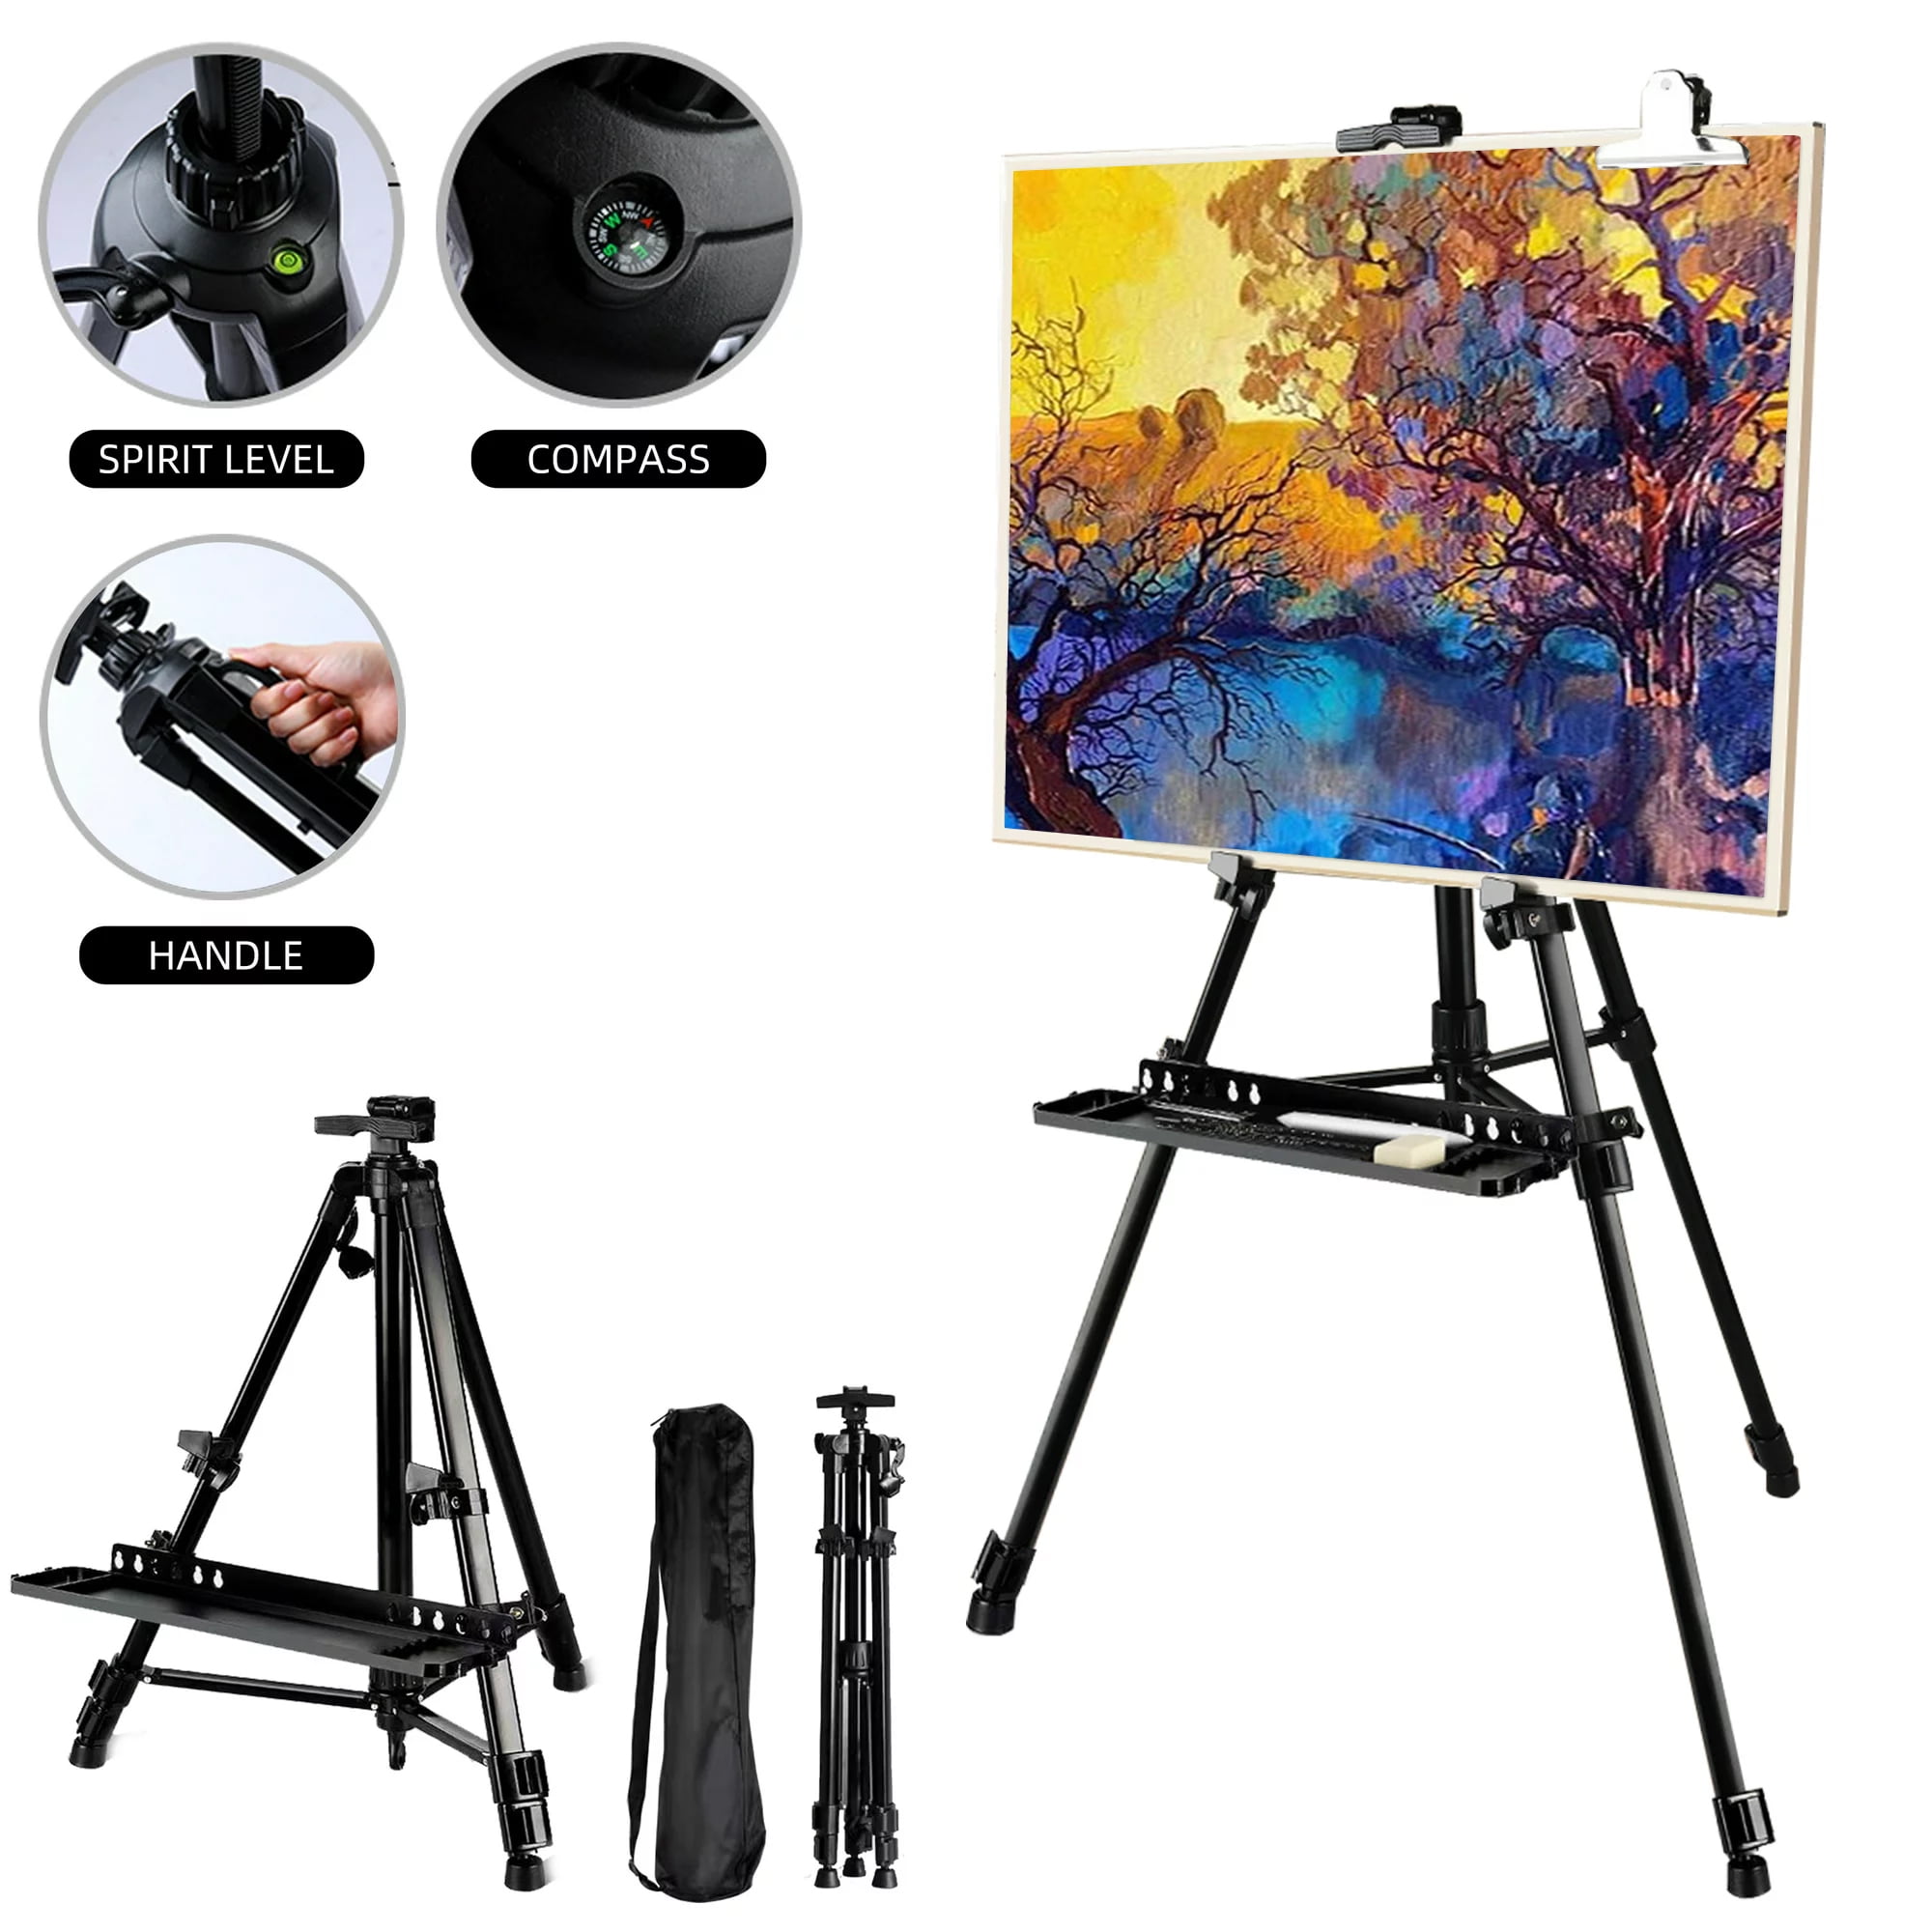 ARTIFY Art Supplies ARTIFY 66 Inches Double Tier Easel Stand Adjustable Height from 22-66 Tripod for Painting and Display with A Carrying Bag Pack Bla